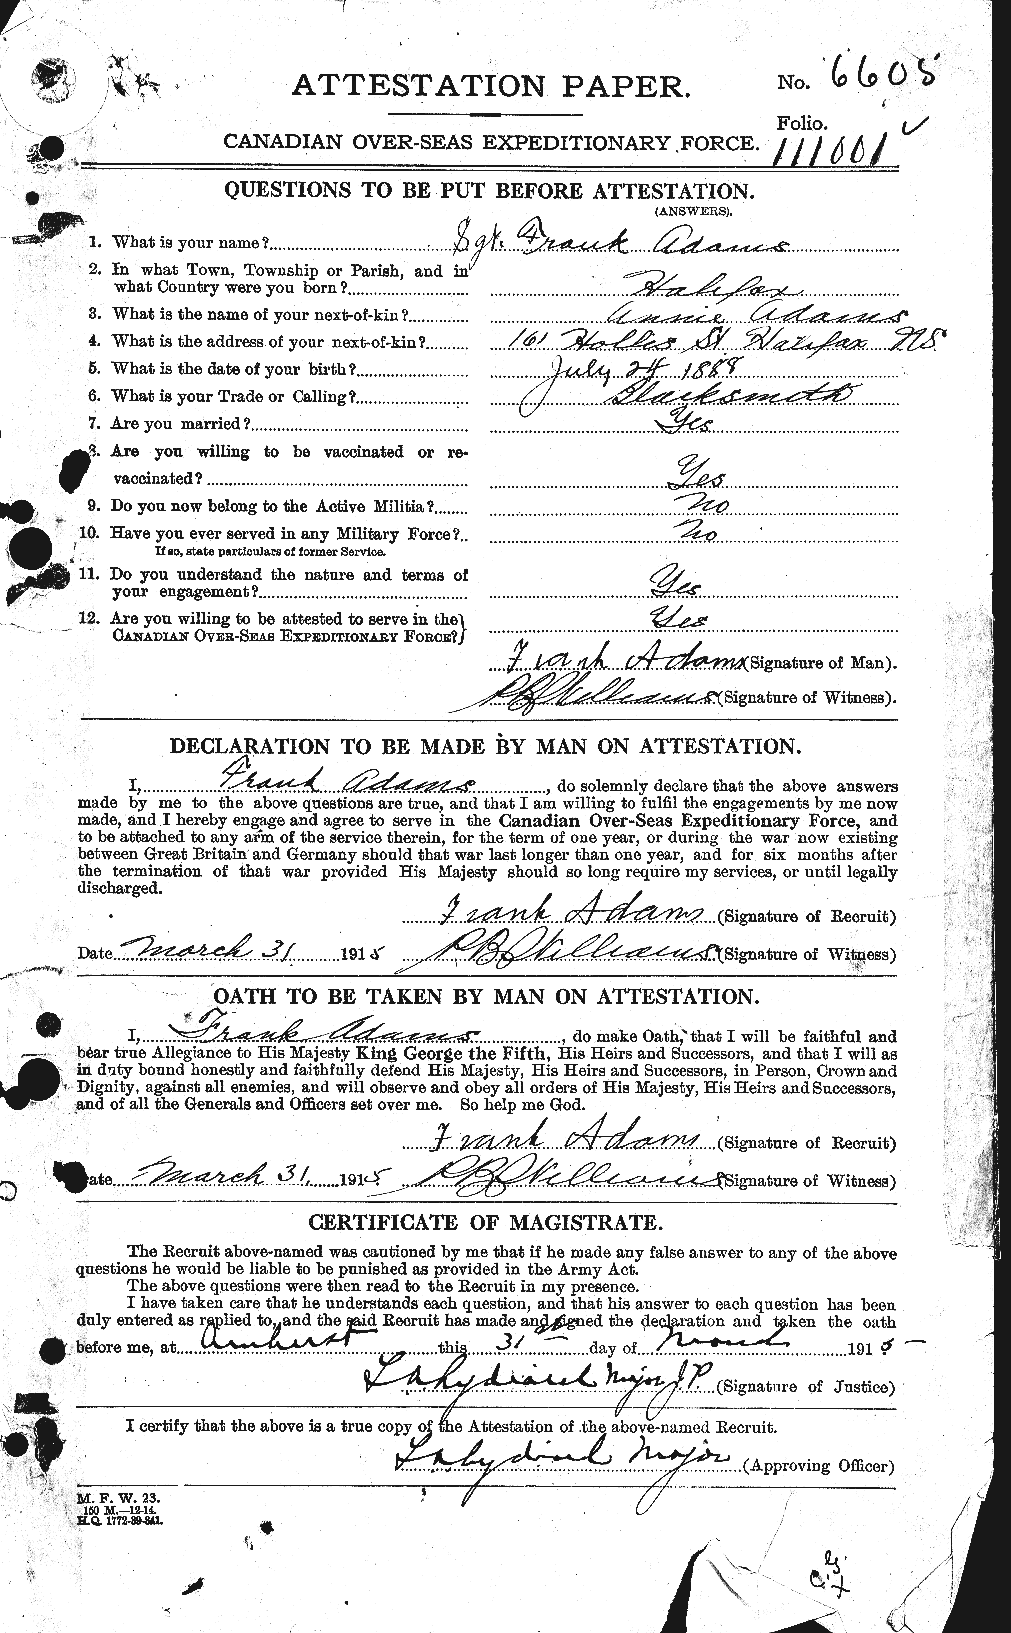 Personnel Records of the First World War - CEF 202605a